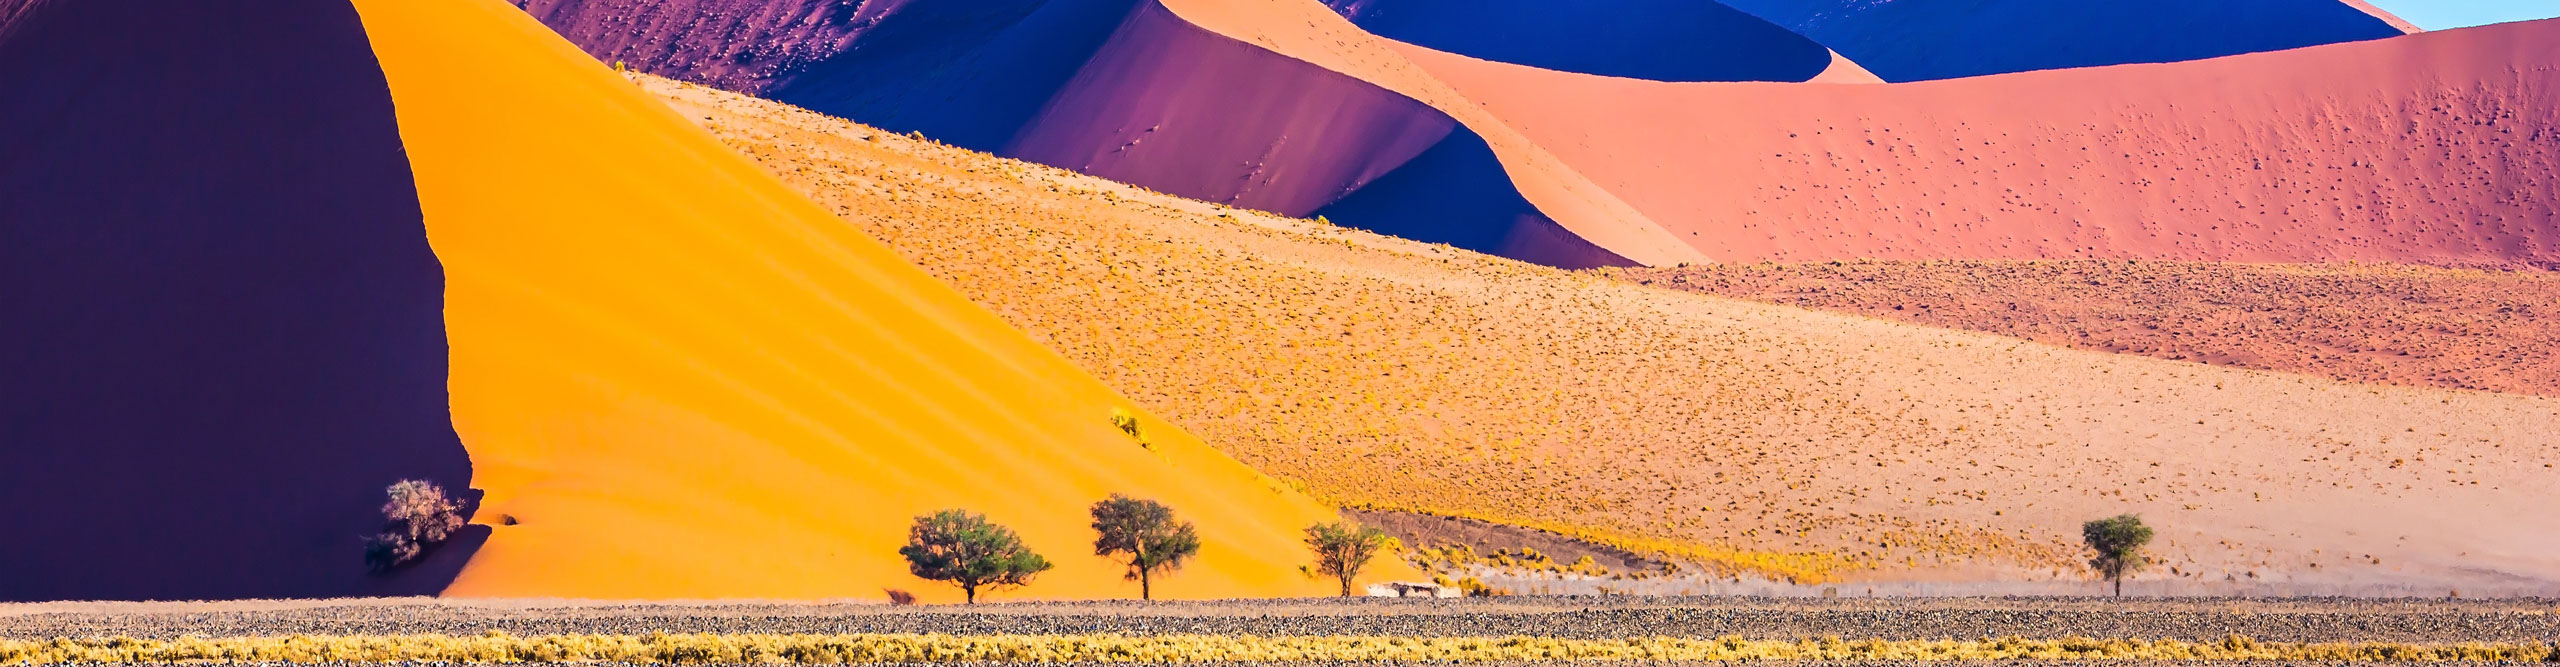 Namib-Naukluft National Park, Fancifully curved sharp crests of orange dunes with tree in Namibia